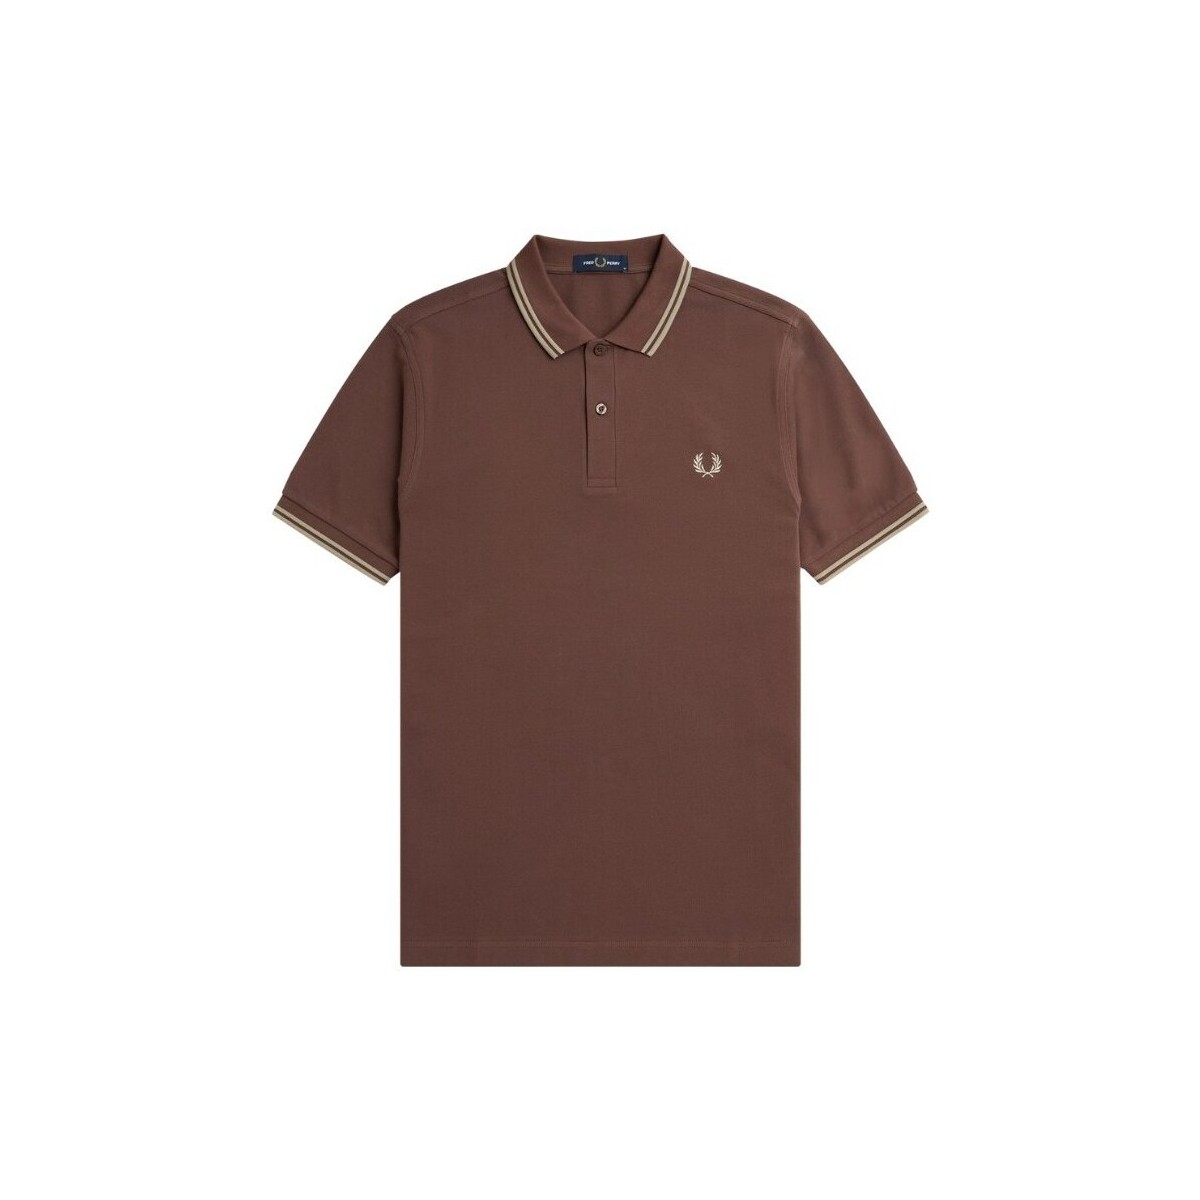 Vêtements Homme Polos manches courtes Fred Perry  Multicolore